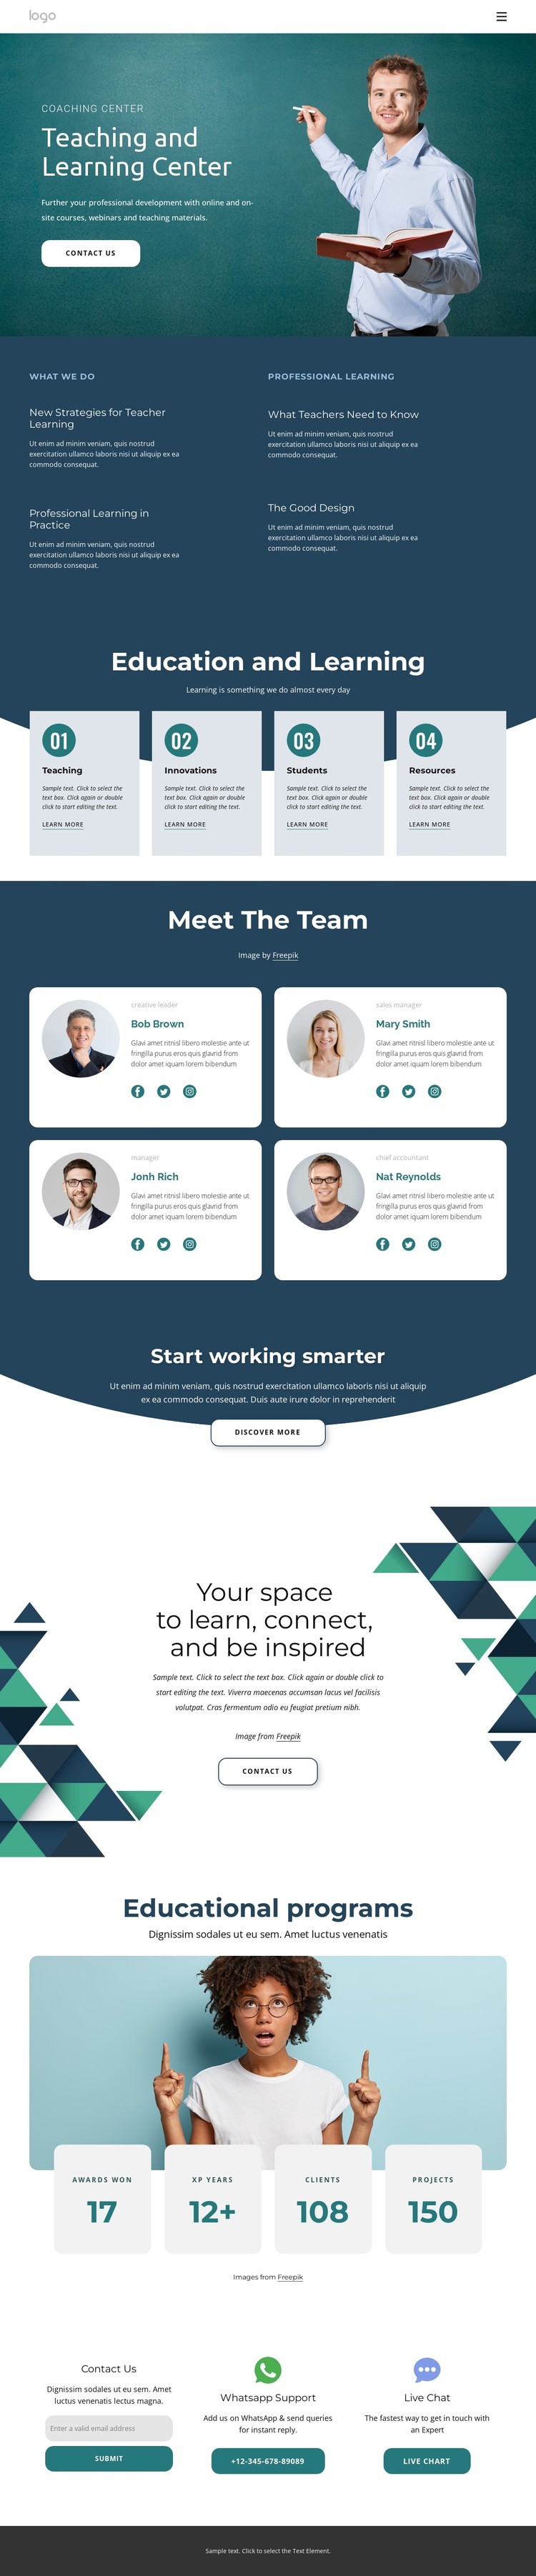 Teaching and learning center CSS Template